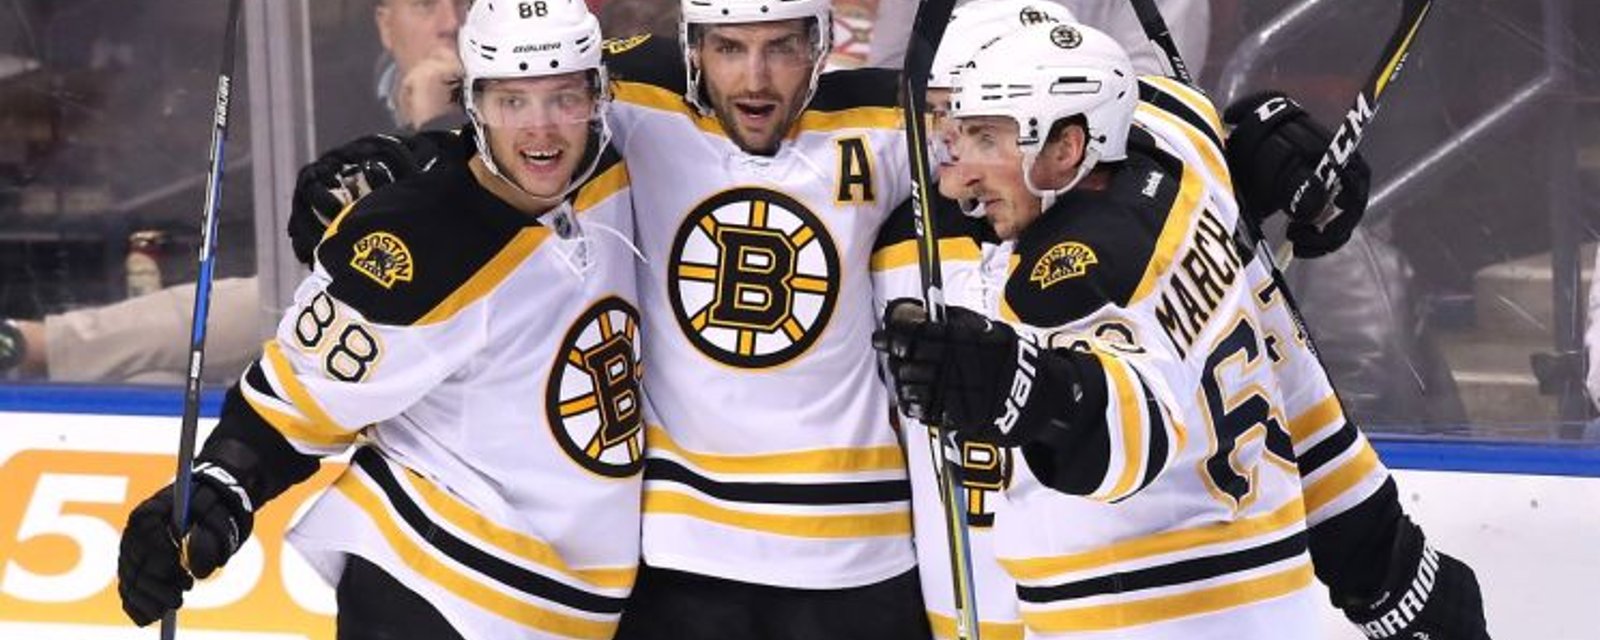 Bruins’ coach calls one of his player the face of the franchise 